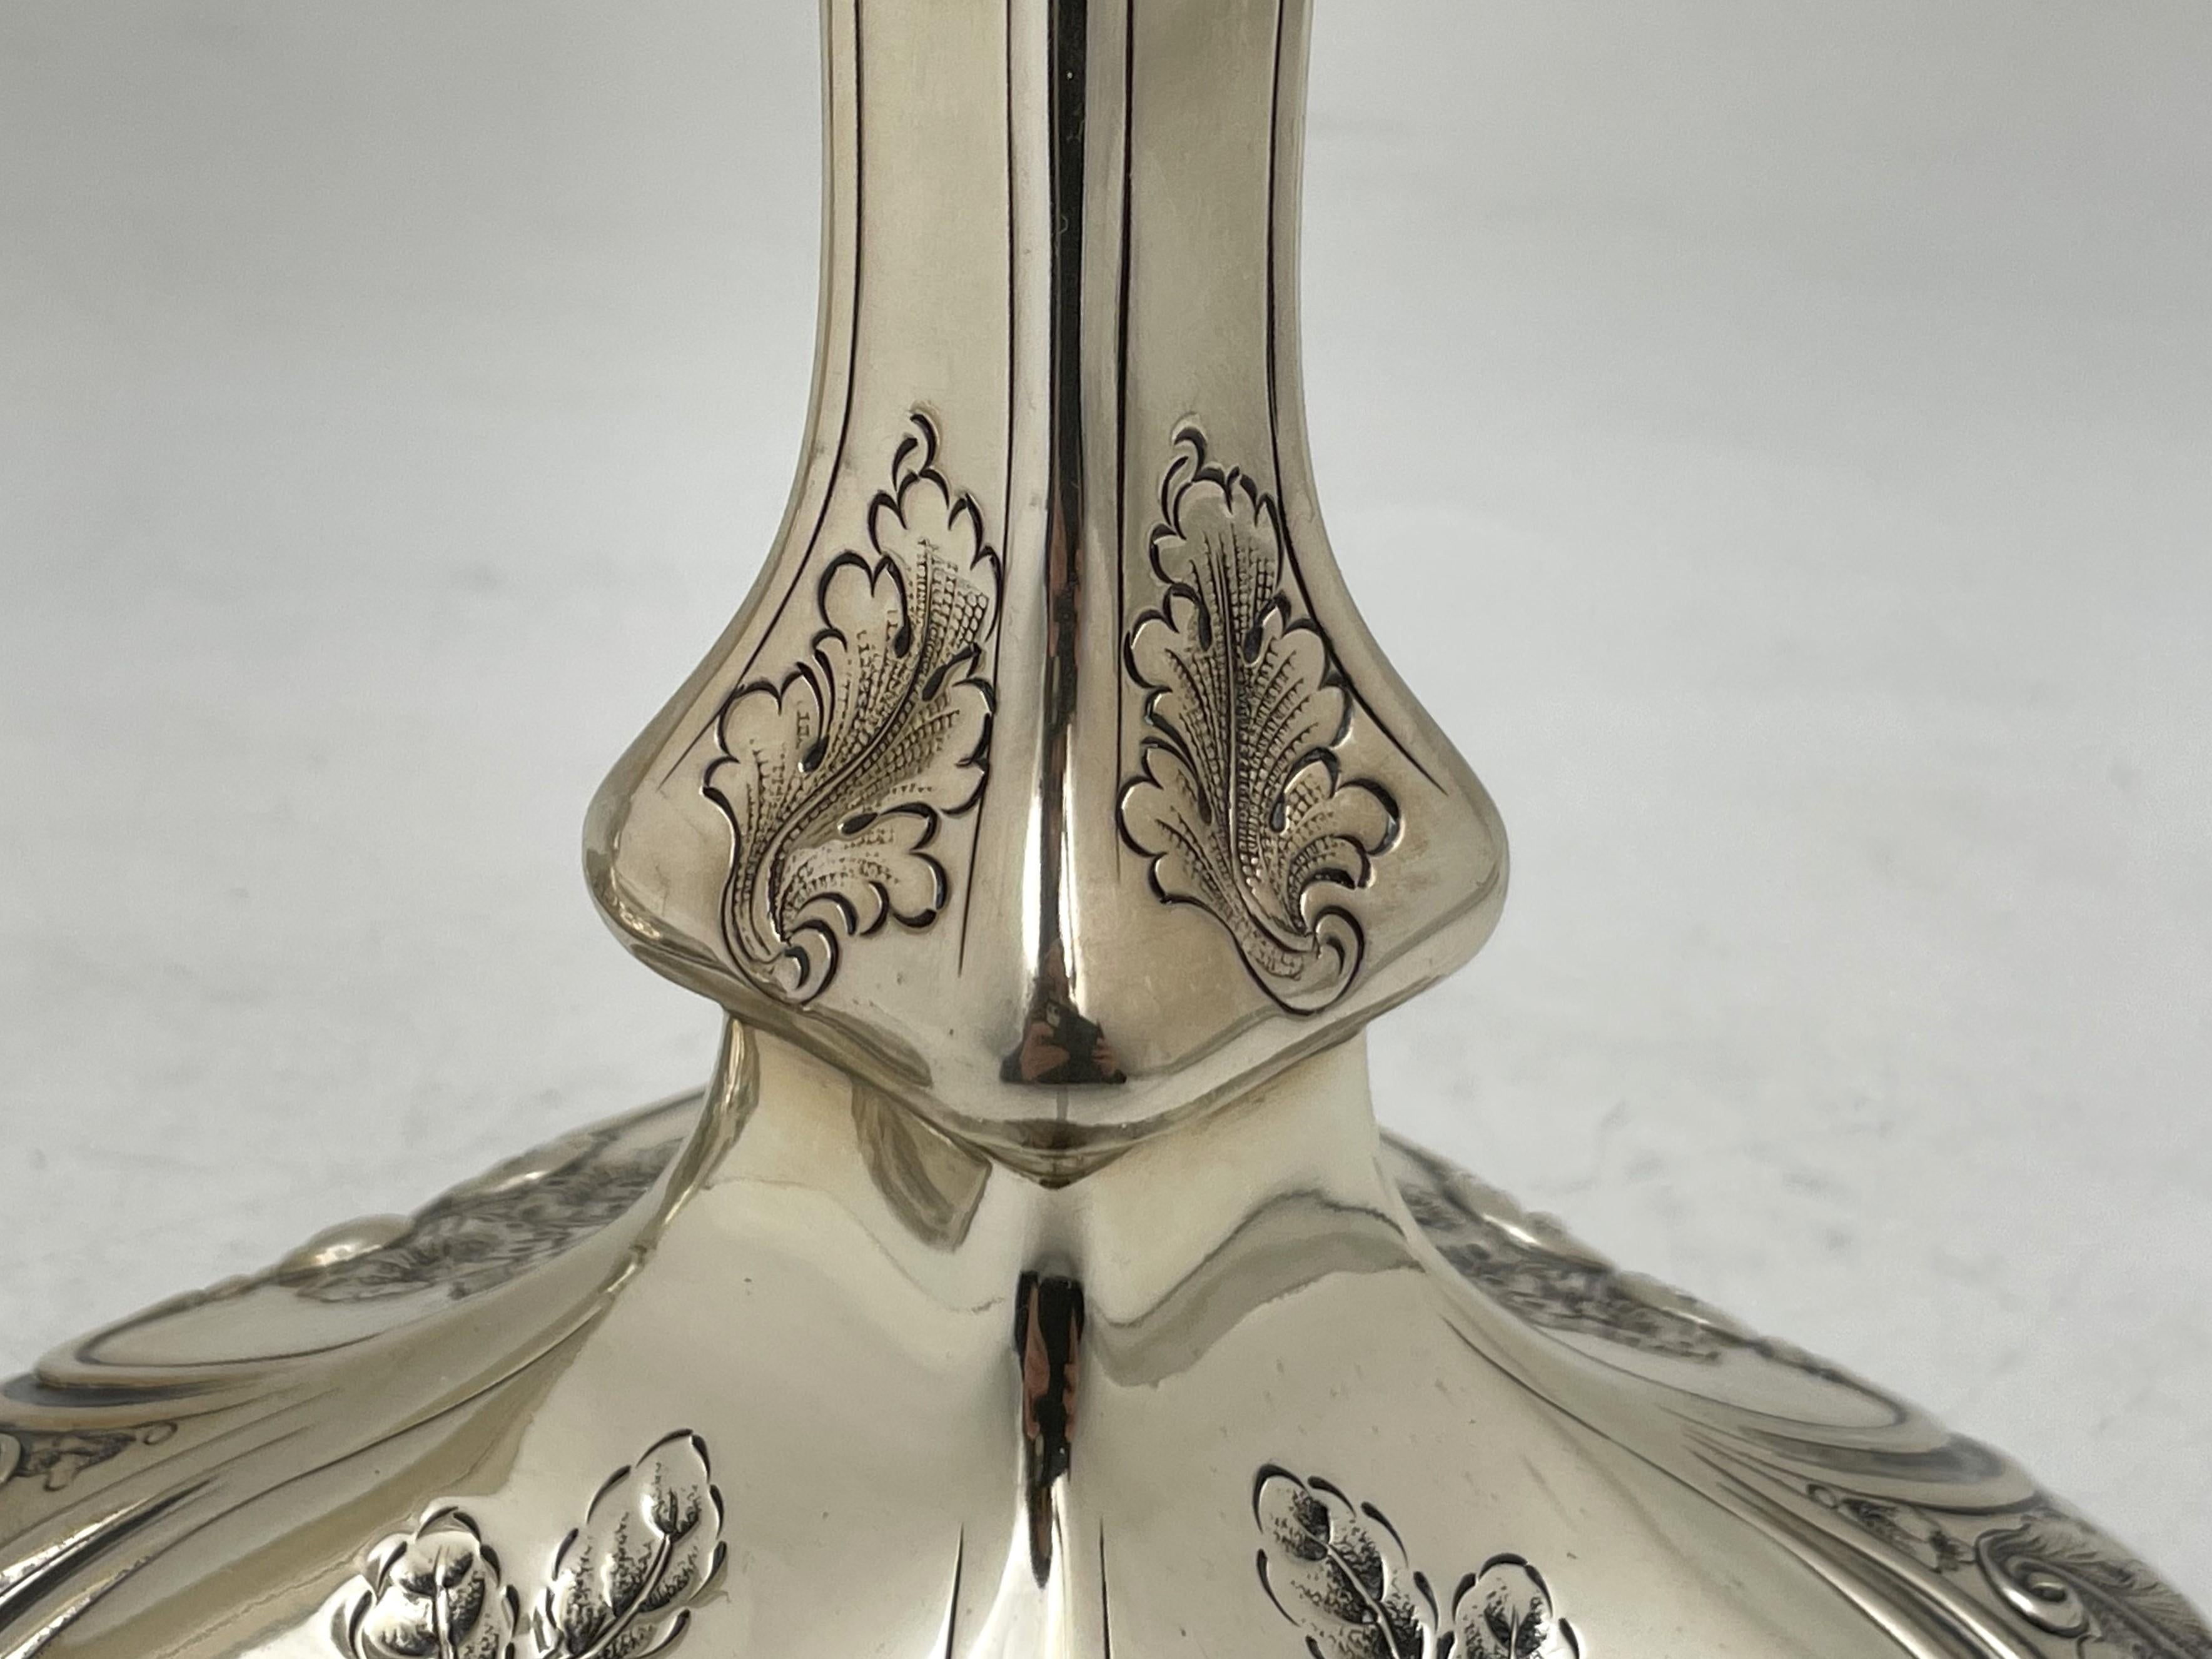 Shreve & Co. Pair of Sterling Silver Candlesticks in Art Nouveau Style For Sale 3